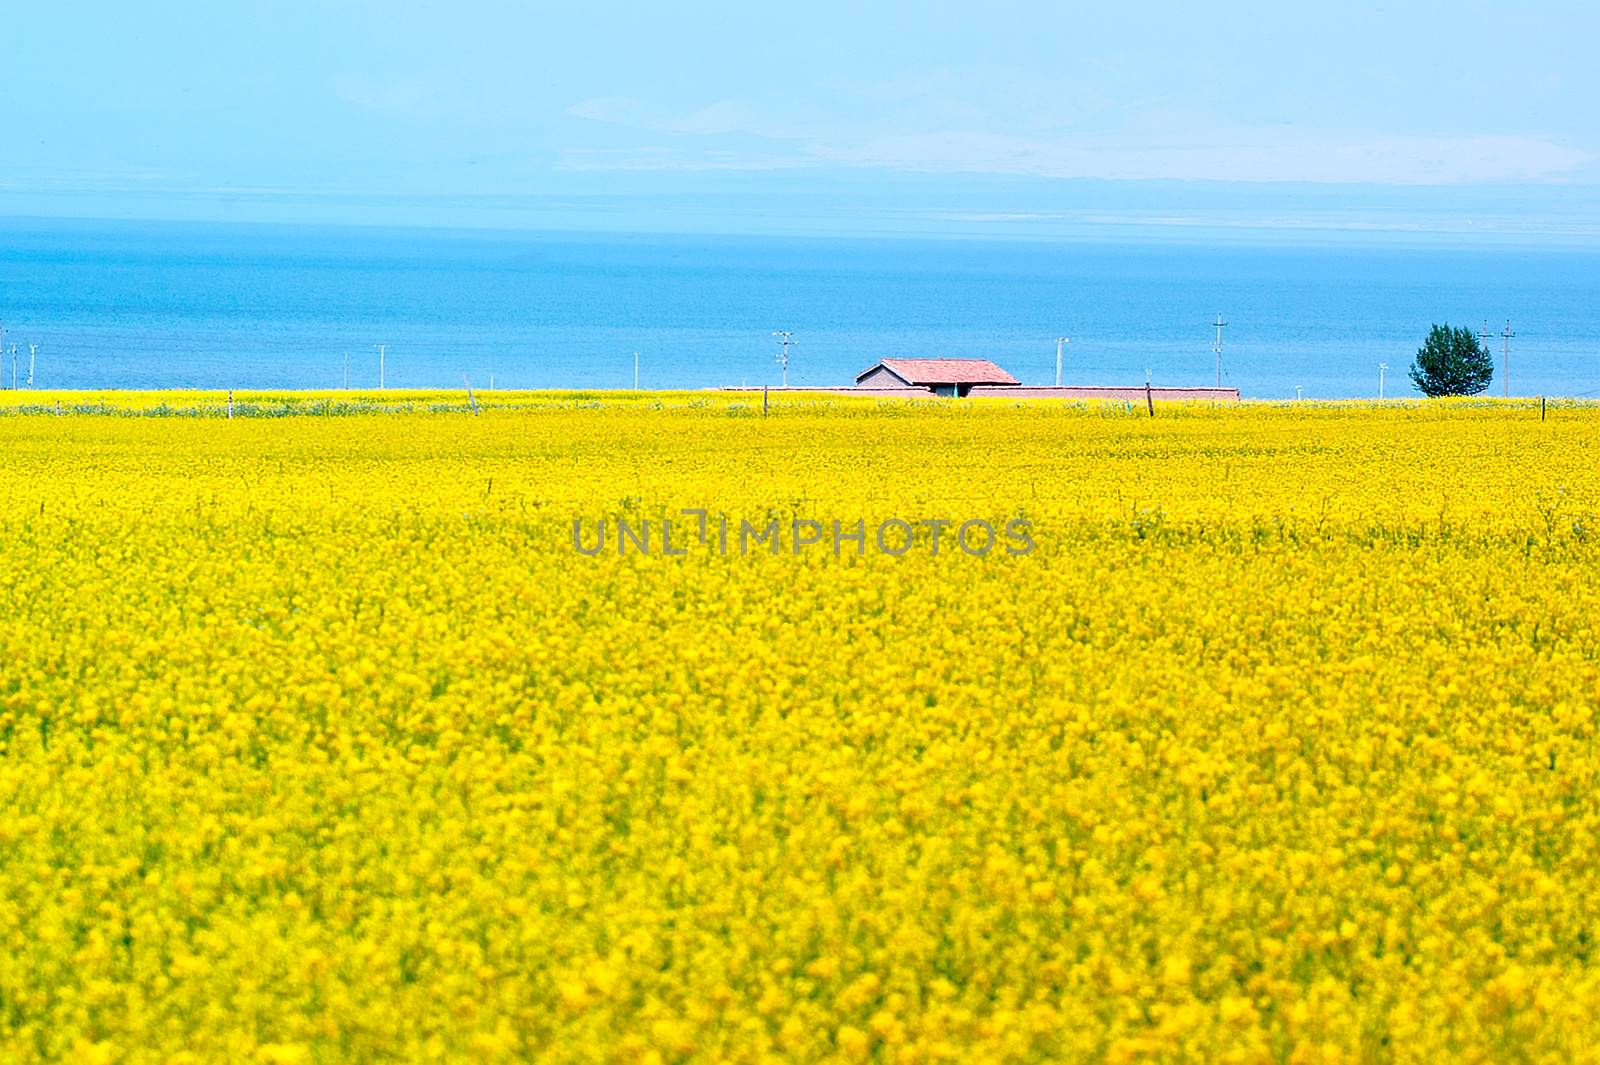 Qinghai Lake views - canola flower fields by xfdly5